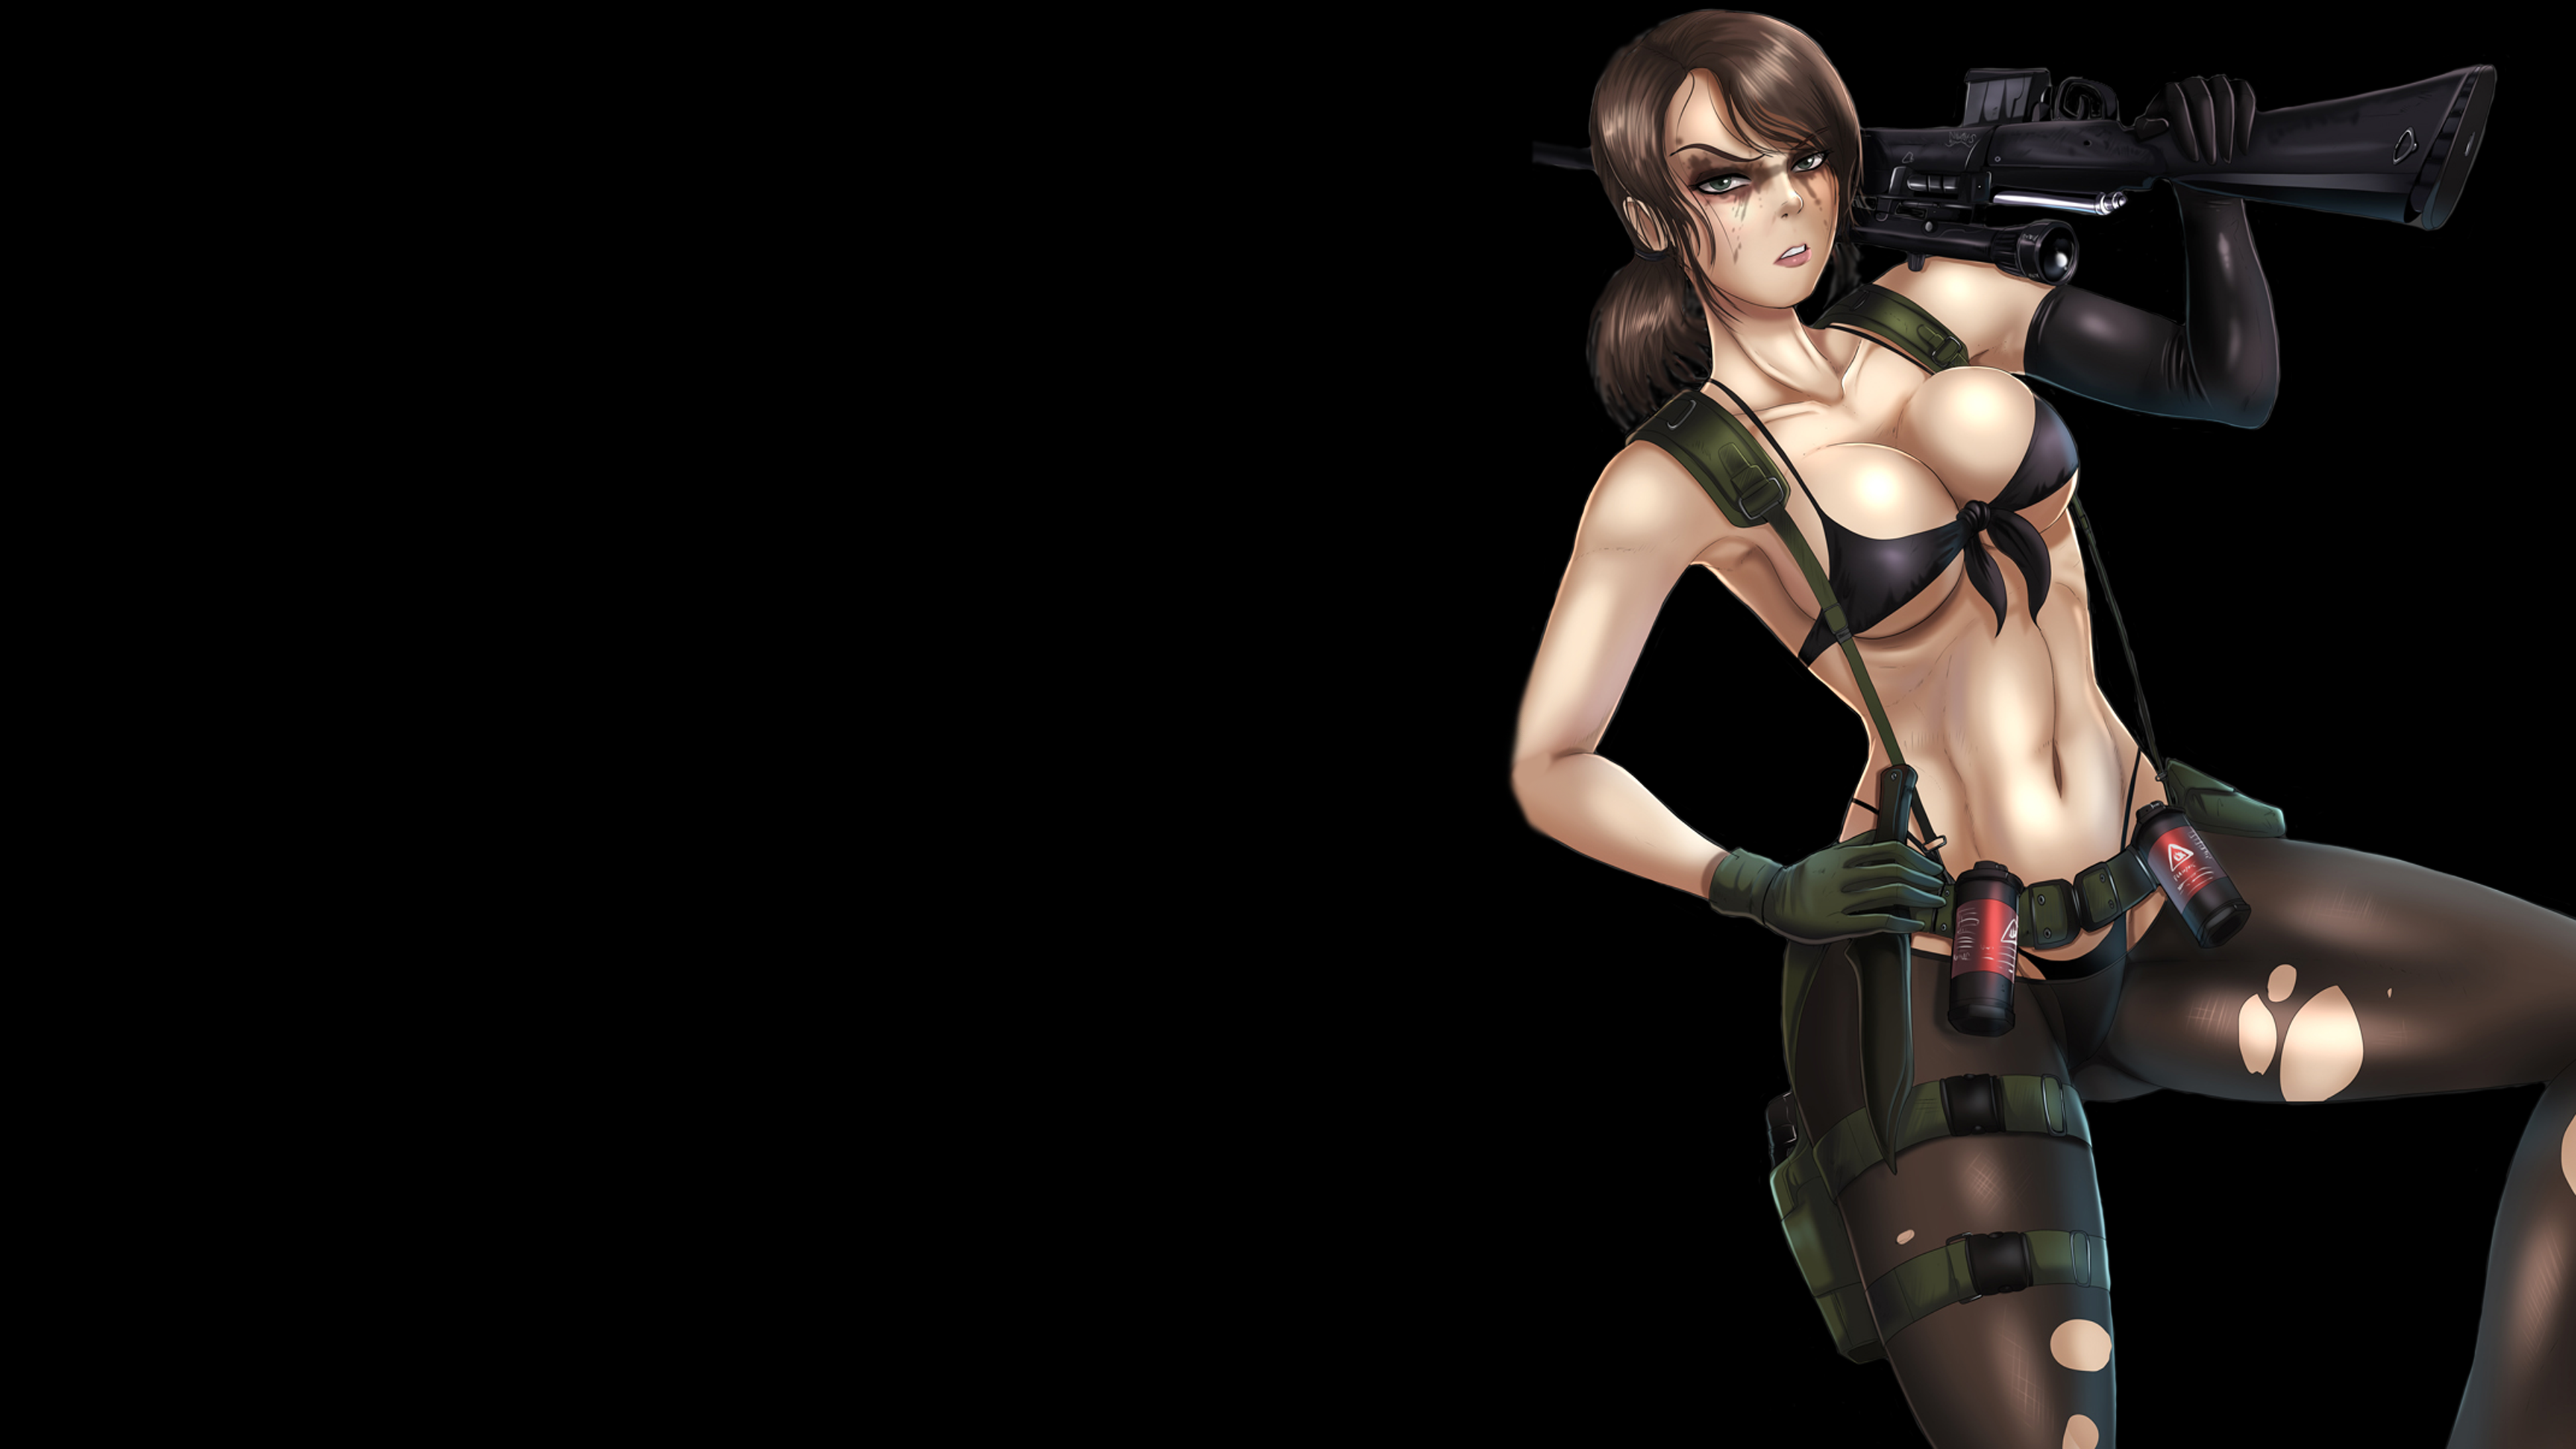 General 3840x2160 Quiet (metal gear) Metal Gear Solid V: The Phantom Pain fan art Shadbase Metal Gear Solid video games video game characters women video game girls boobs big boobs belly weapon girls with guns brunette torn pantyhose